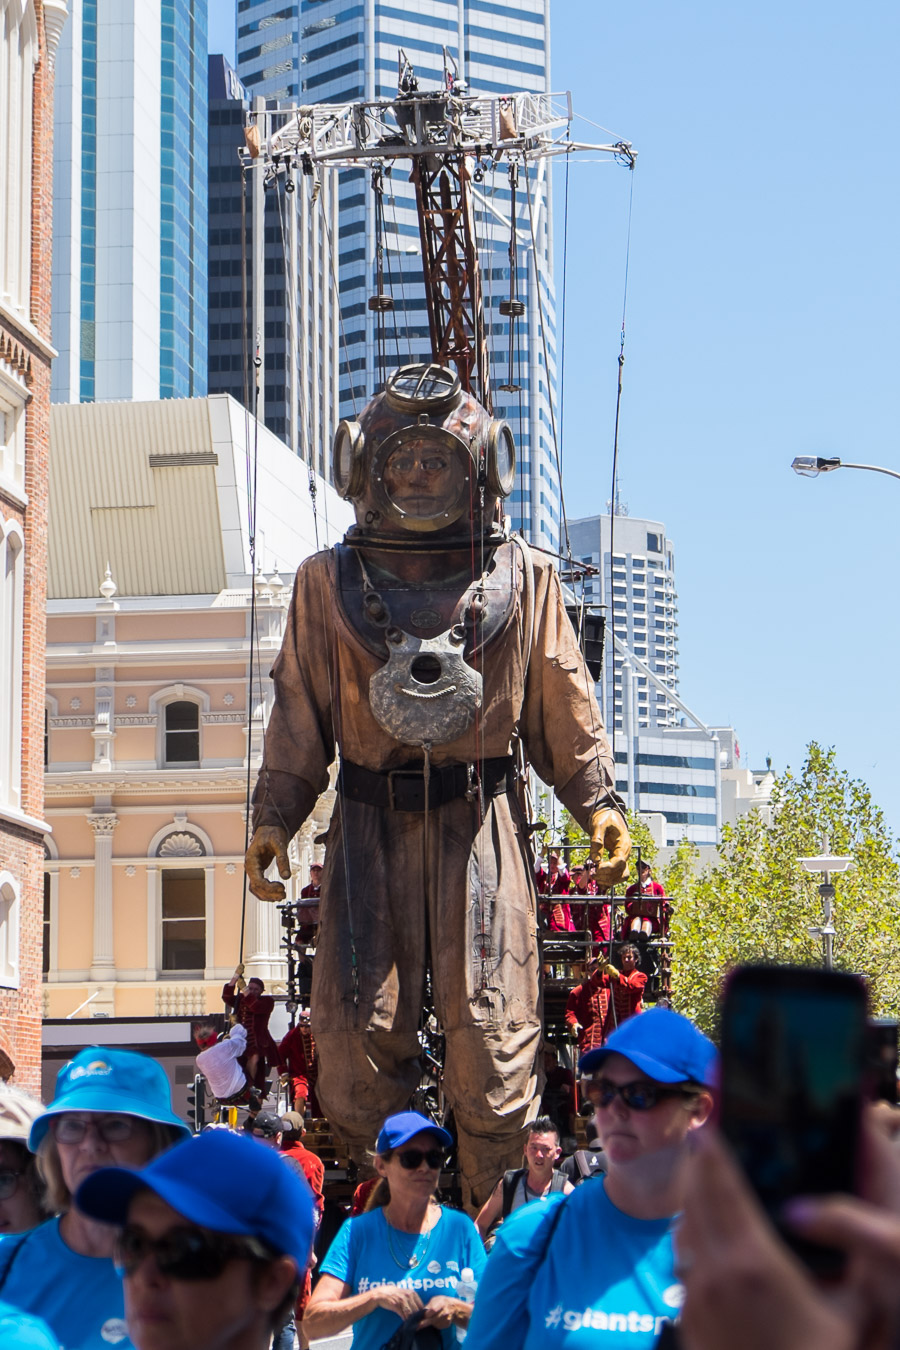 The Diver giant walks down Hay Street on Saturday.